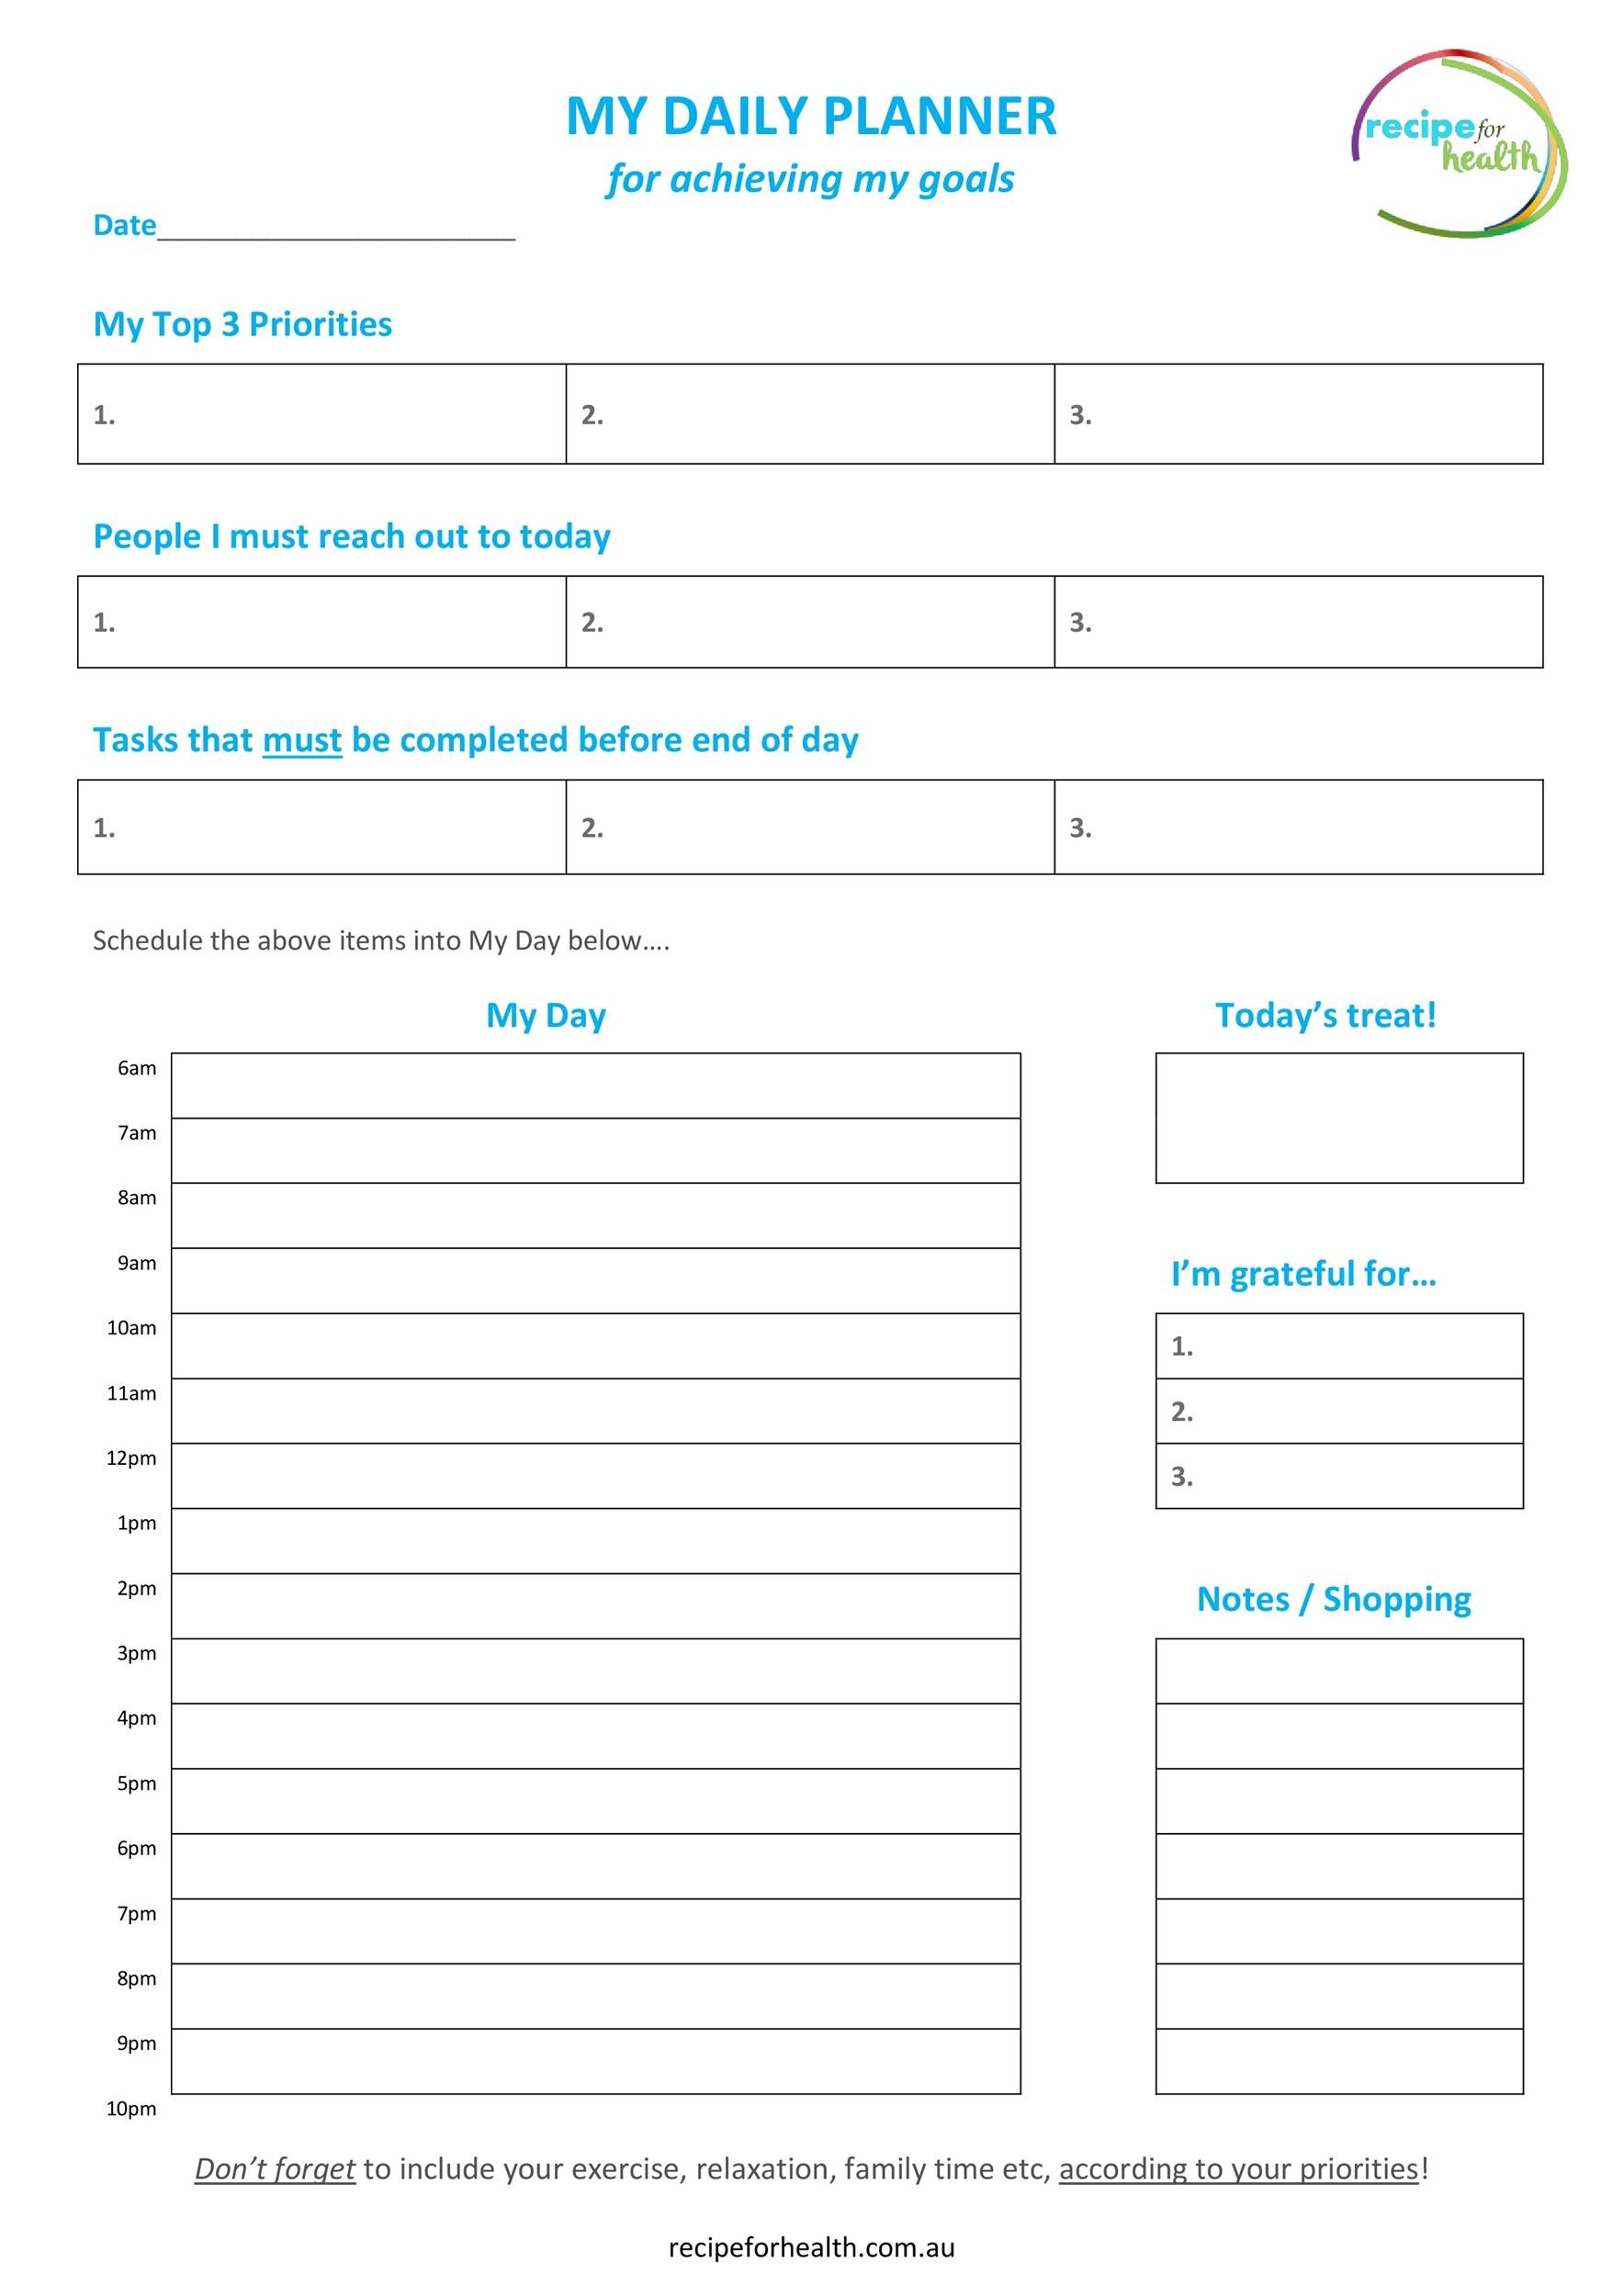 47-printable-daily-planner-templates-free-in-word-excel-pdf